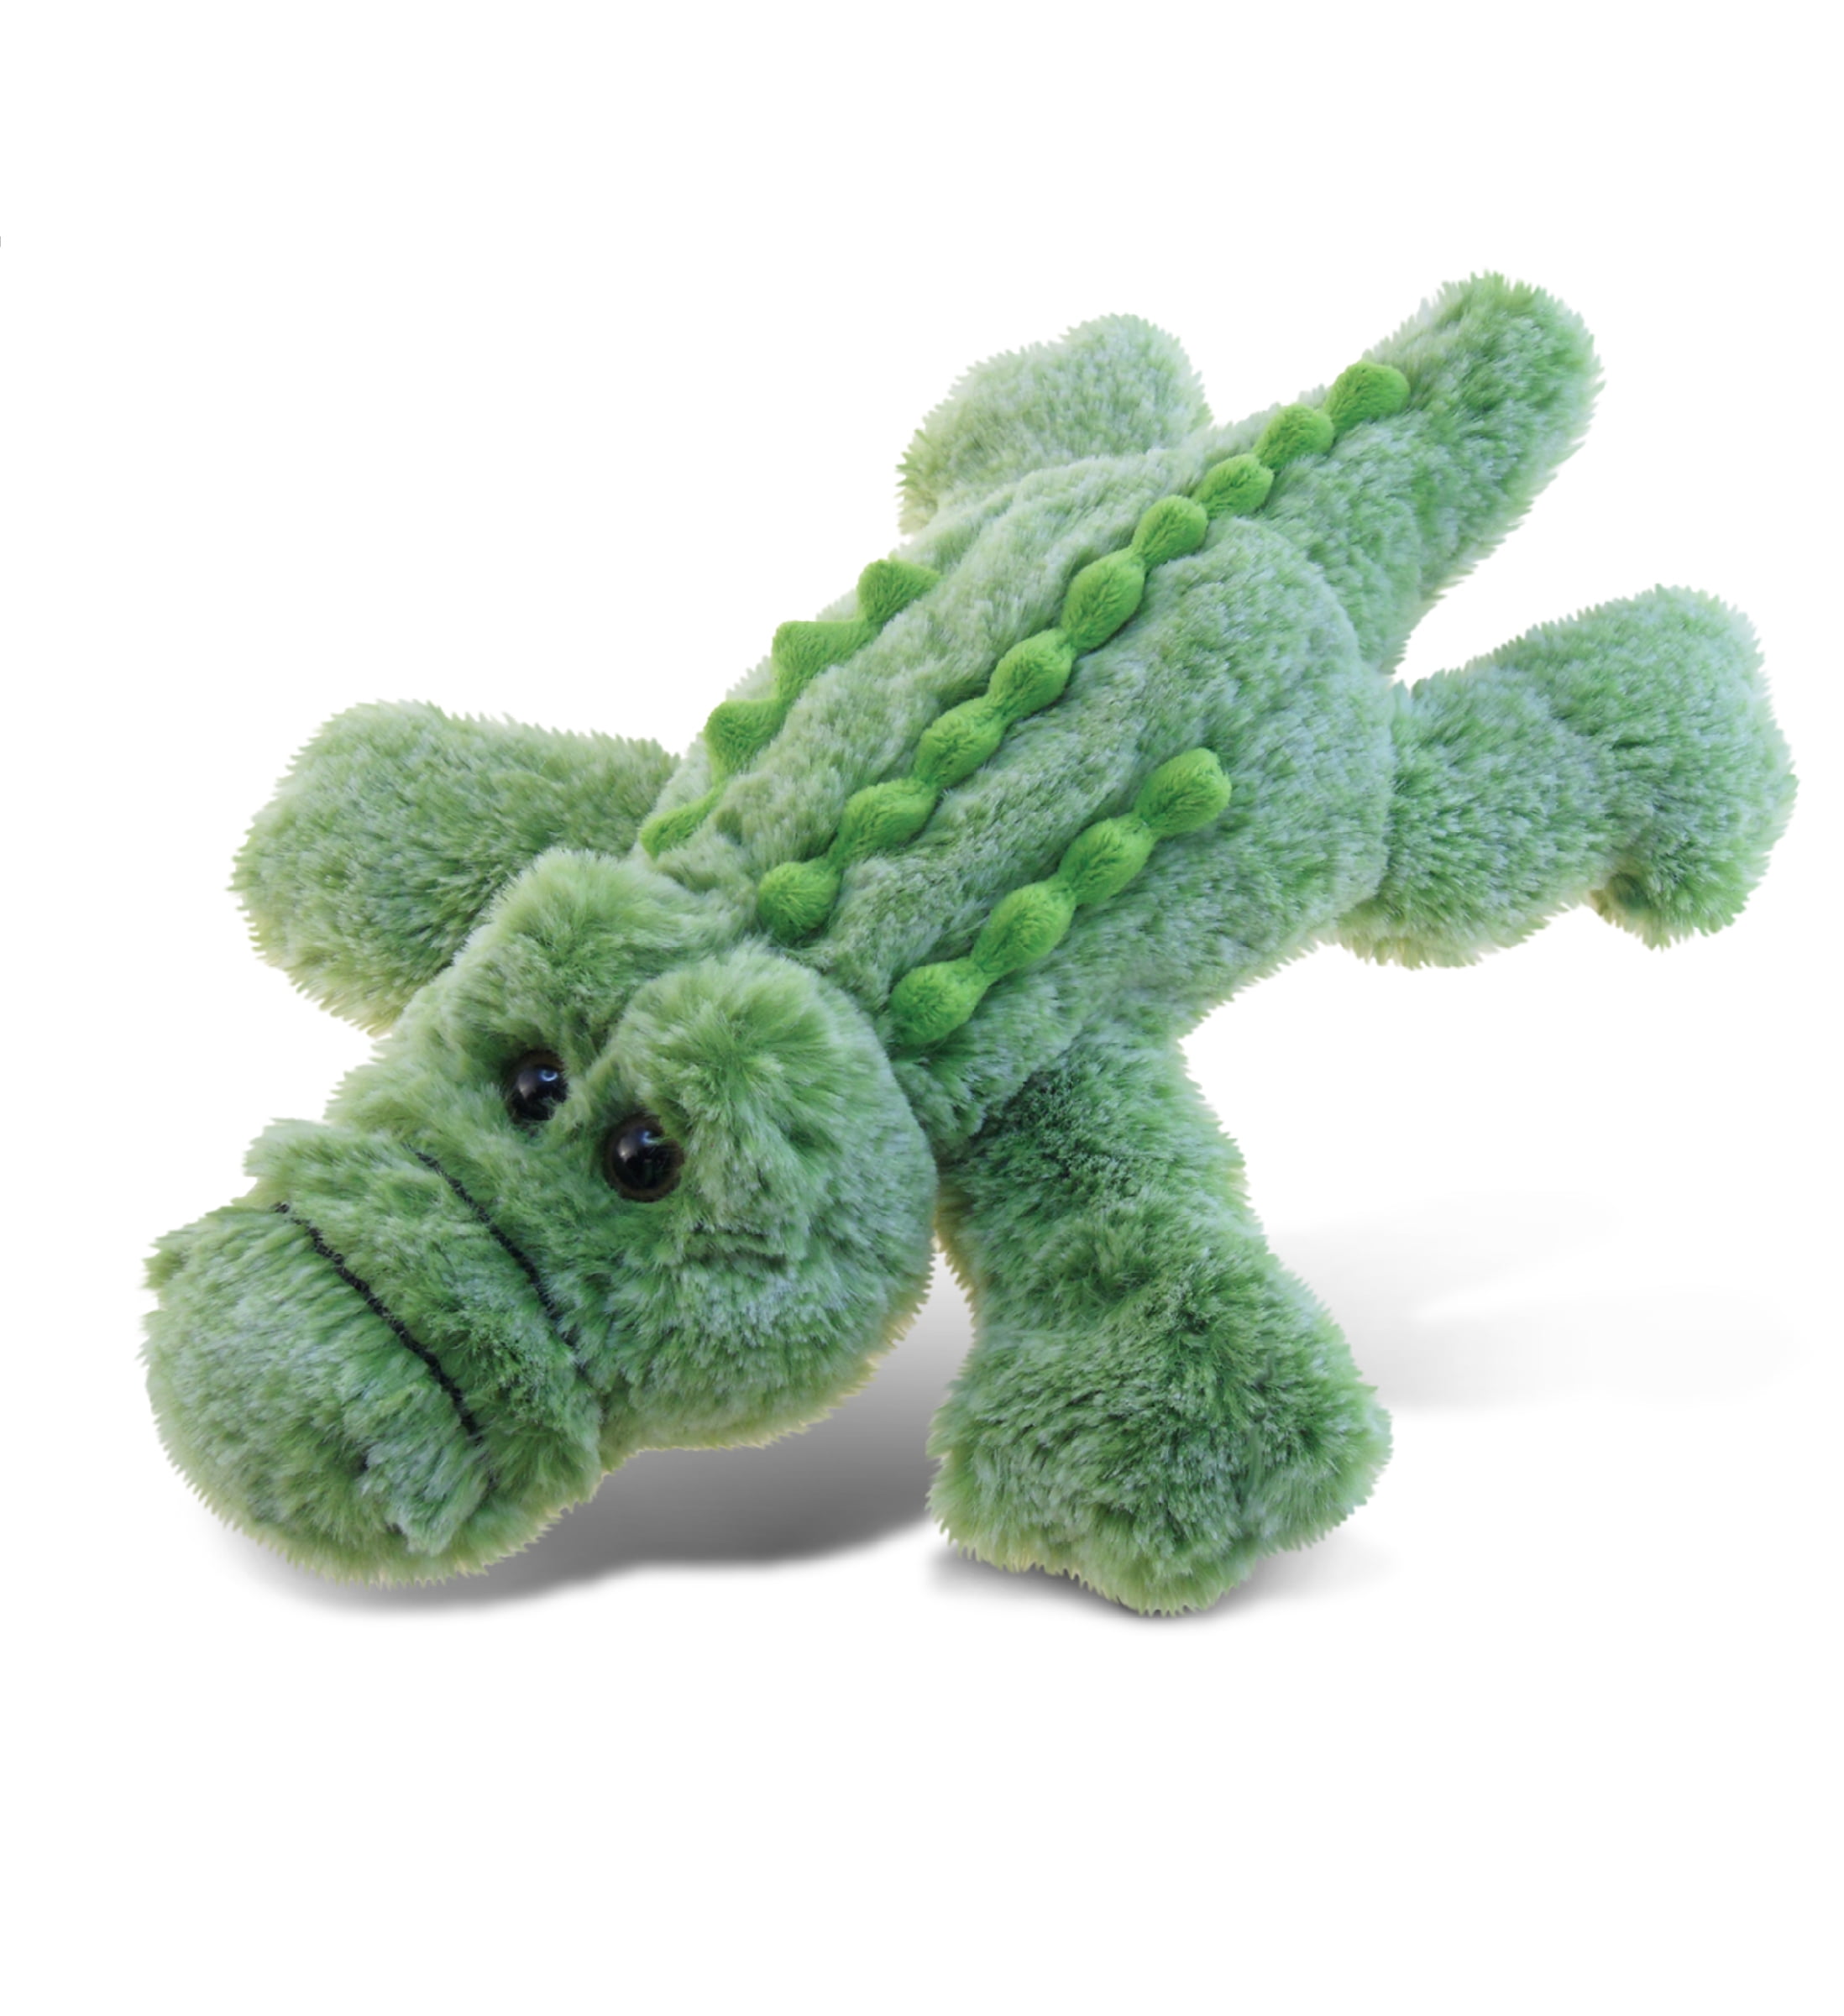 Green Plush Snake Stuffed Animal Toy, Soft Cuddly Plushie Hugger Toy for  Boys & Girls, Birthday Gifts for Kids or Girlfriend, 53